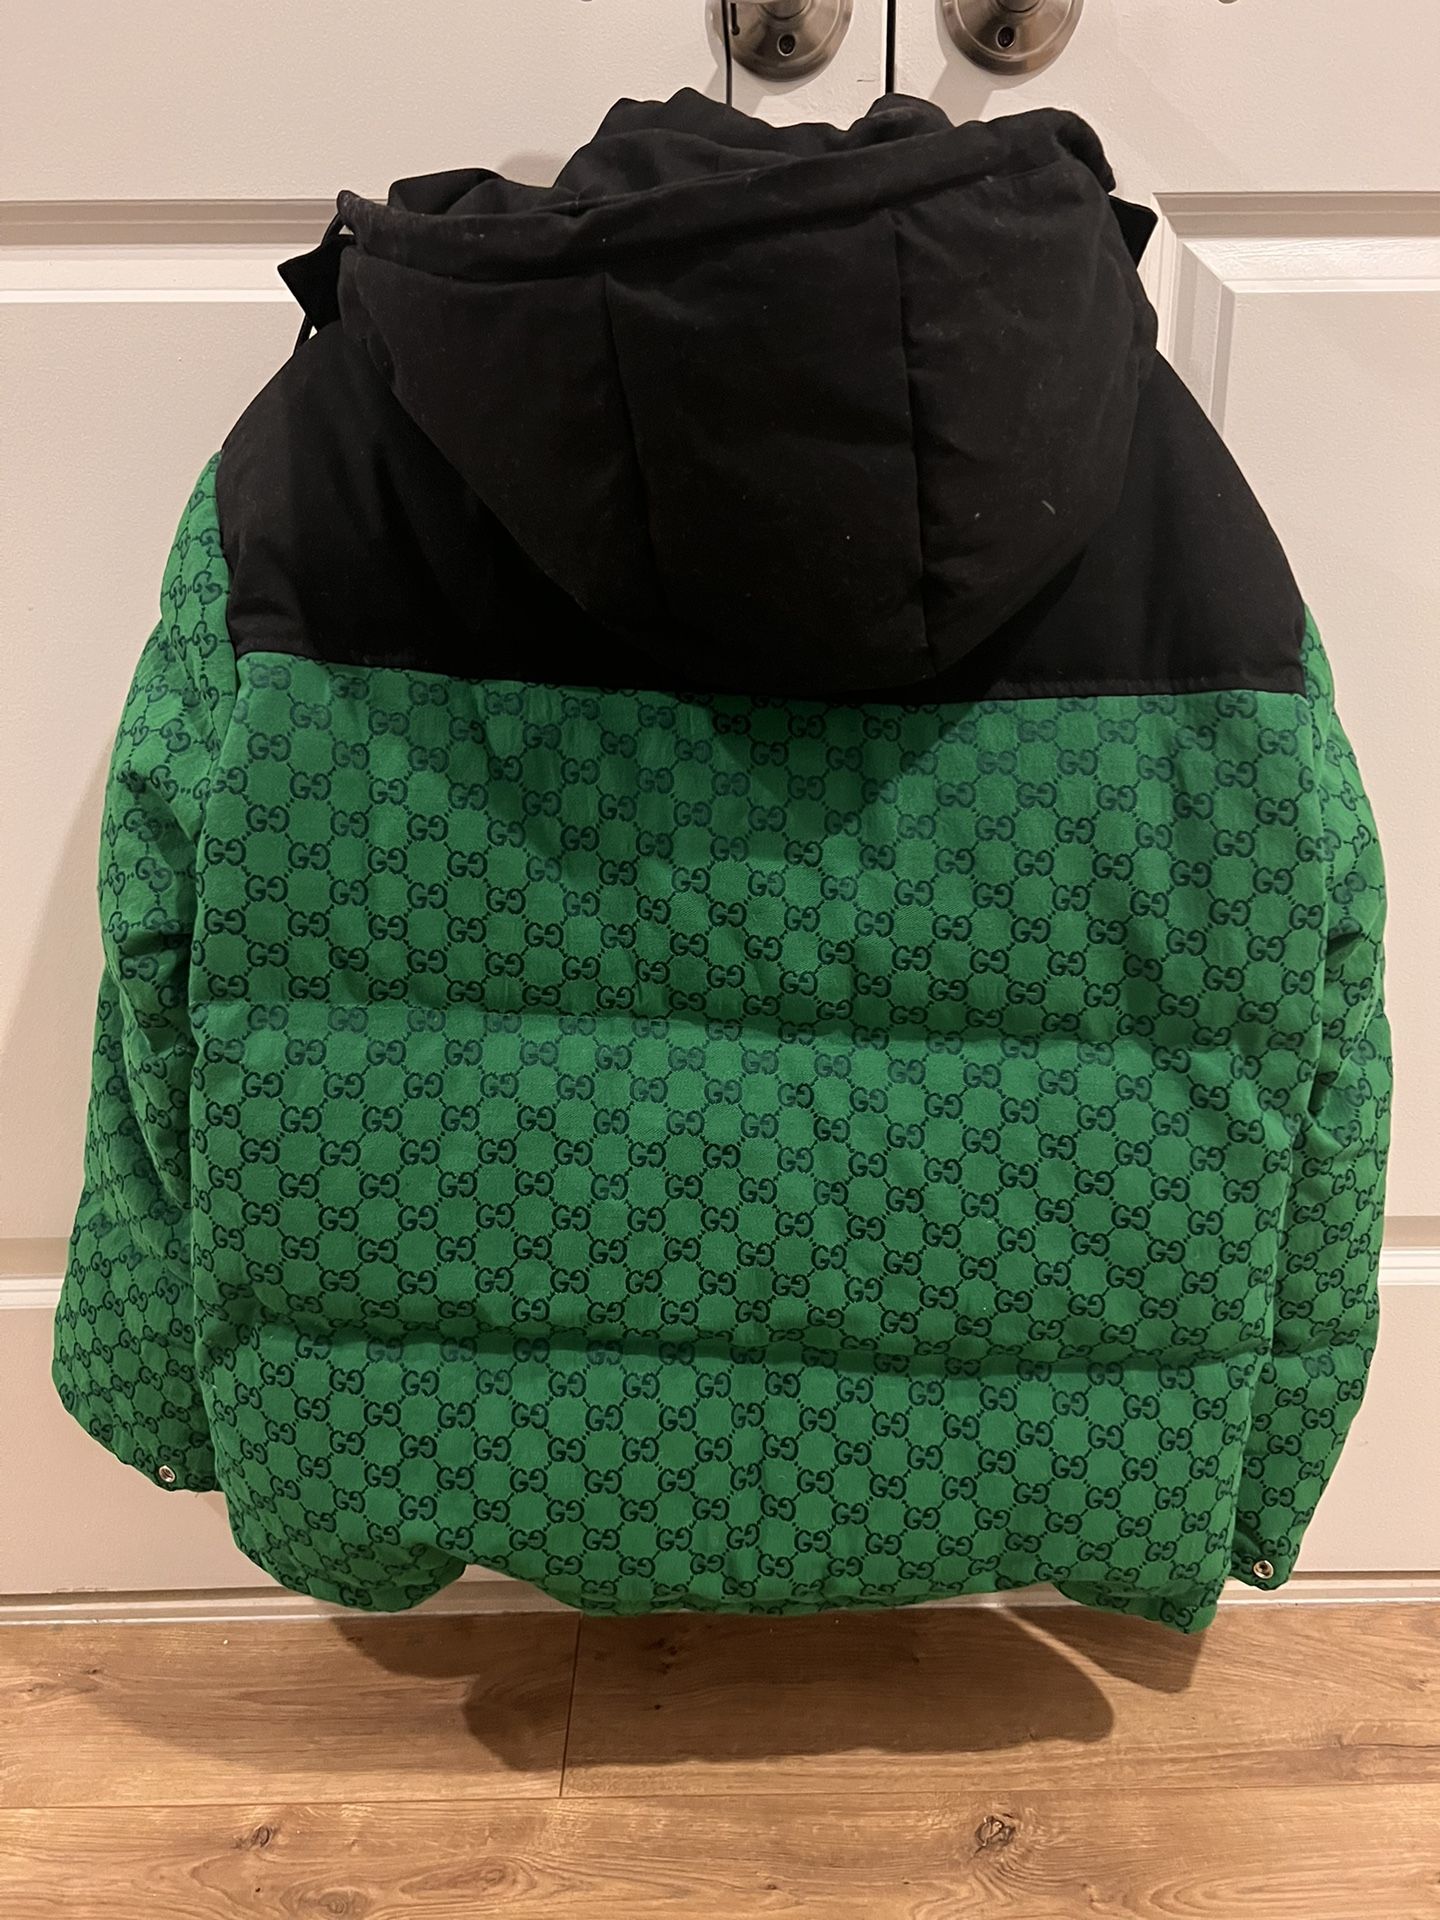 Gucci x the North Face Jacket for Sale in Bowie, MD - OfferUp